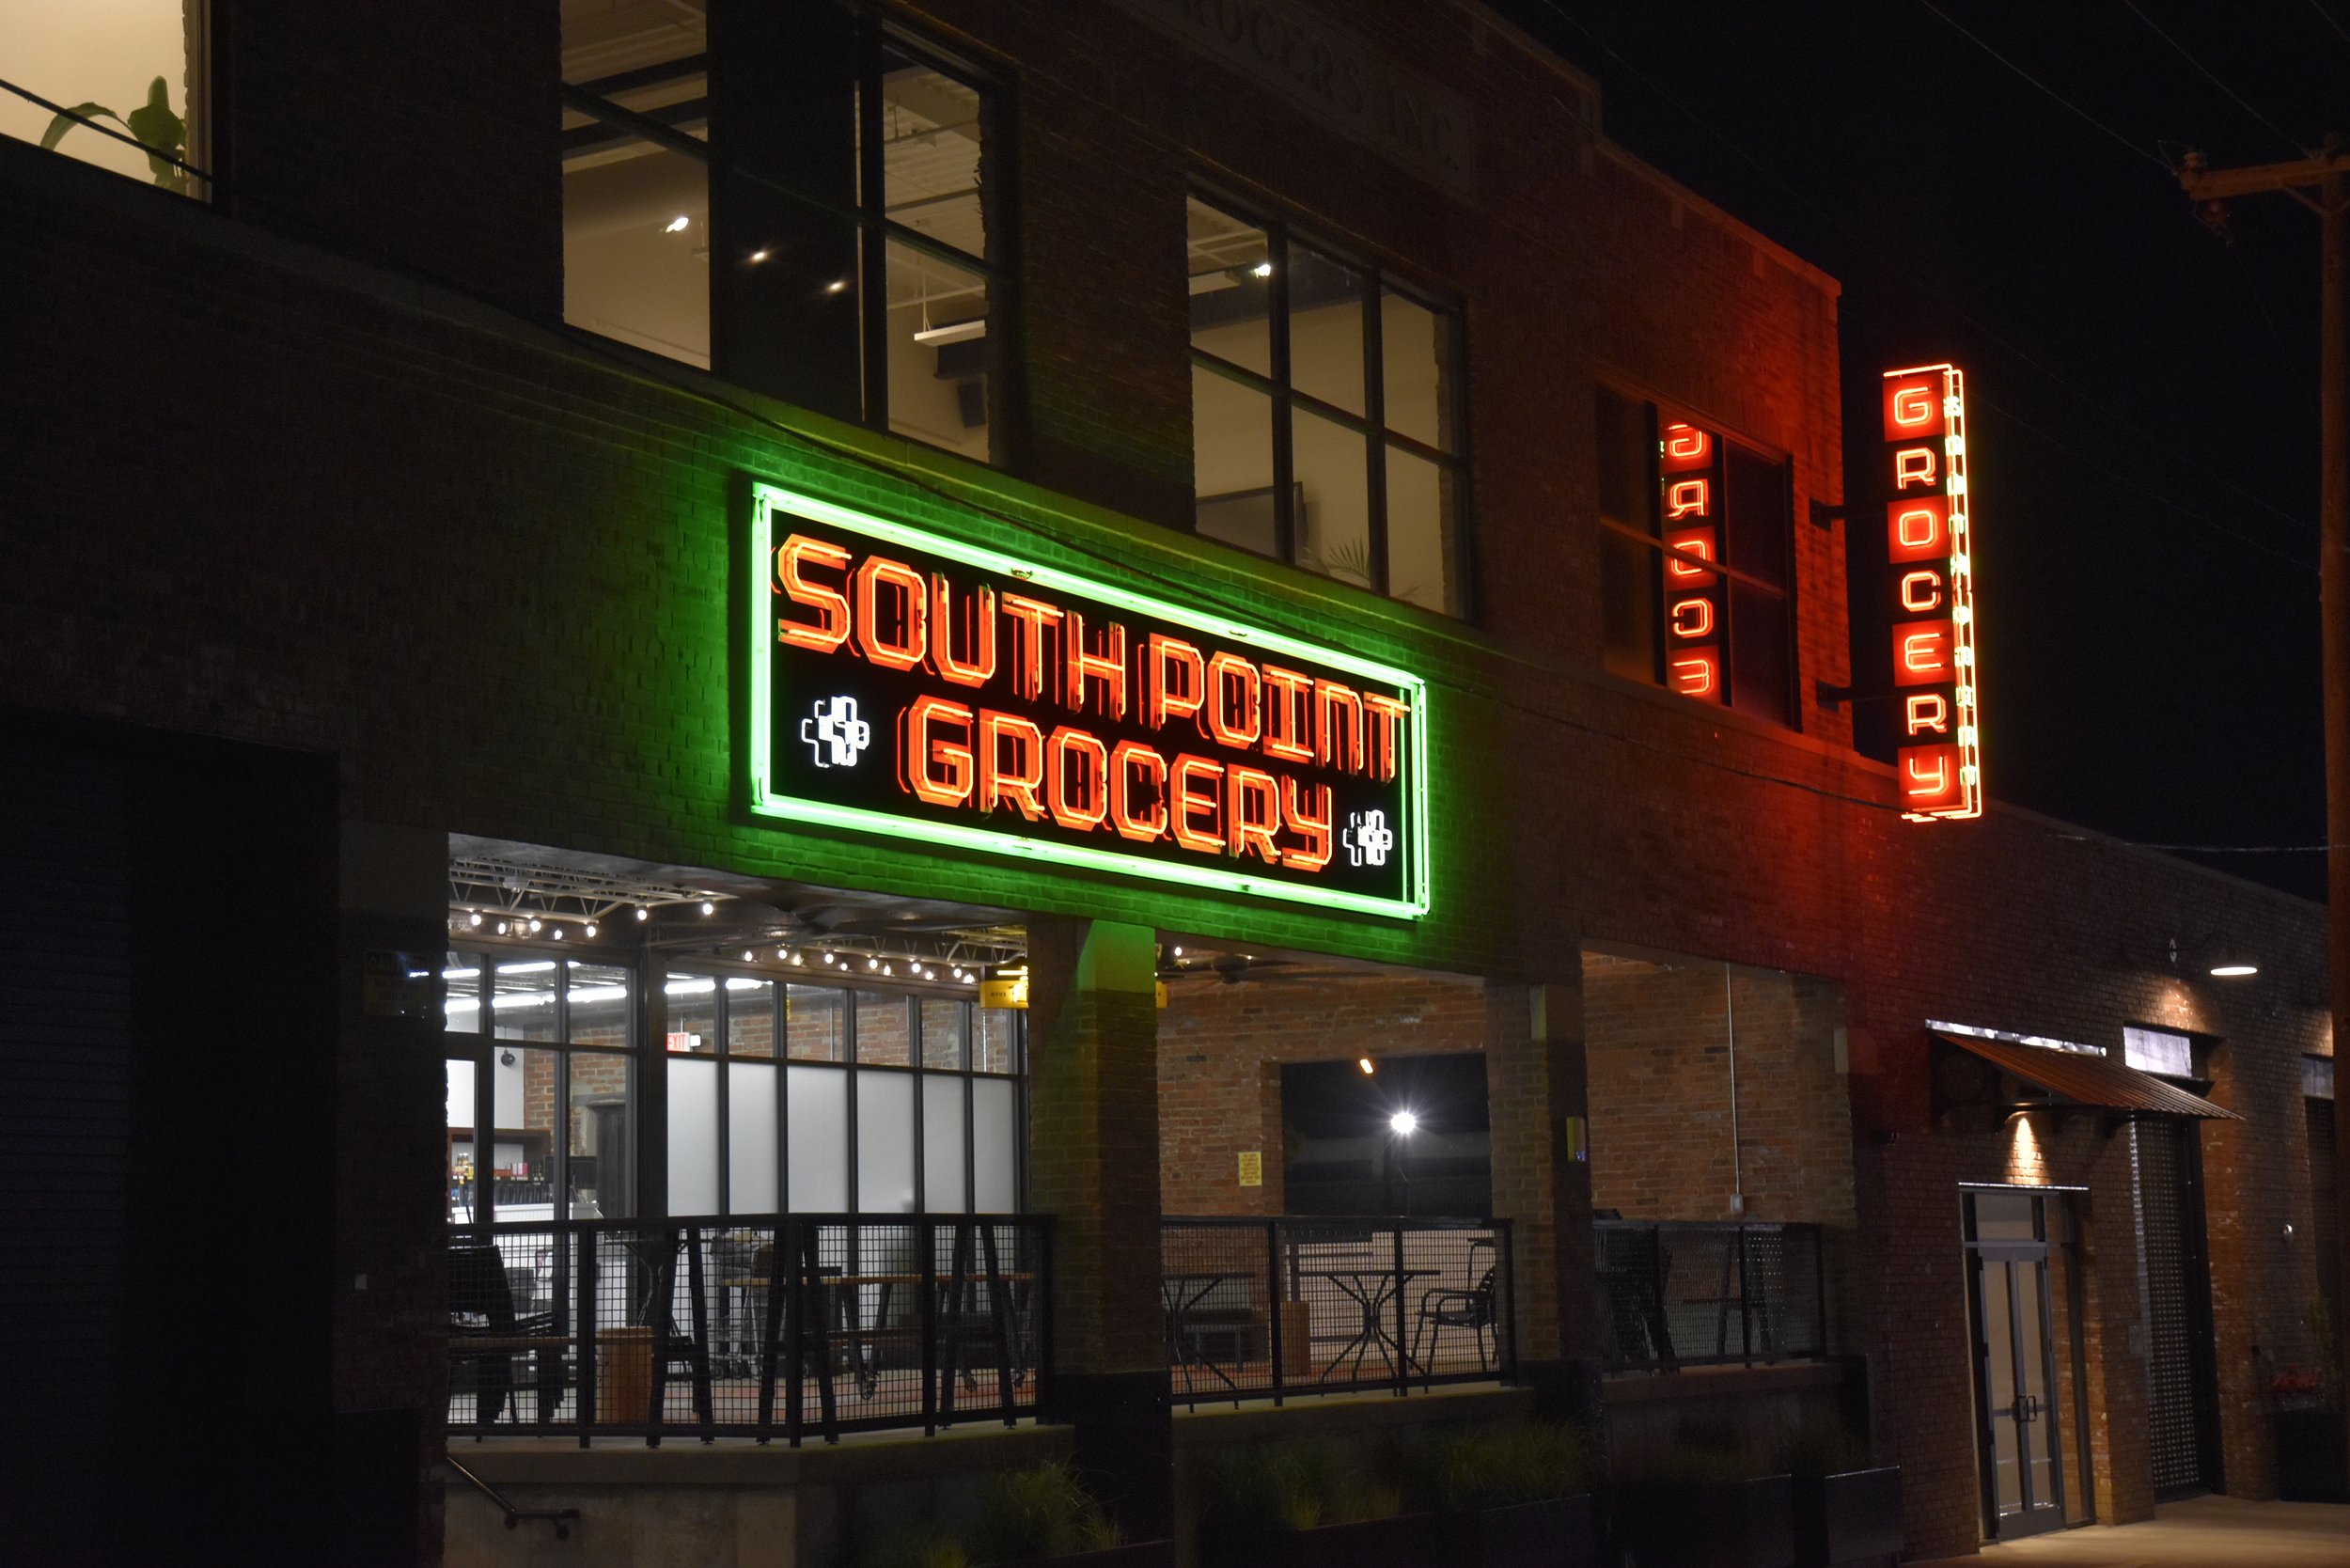  South Point Grocery Project  Downtown Memphis  Main entrance neon cabinet sign and neon blade sign  Branding creative and signage design by Chuck Mitchell  Sign fabrication and installation by Frank Balton Sign Company  Interior Design by Cynthia Ha